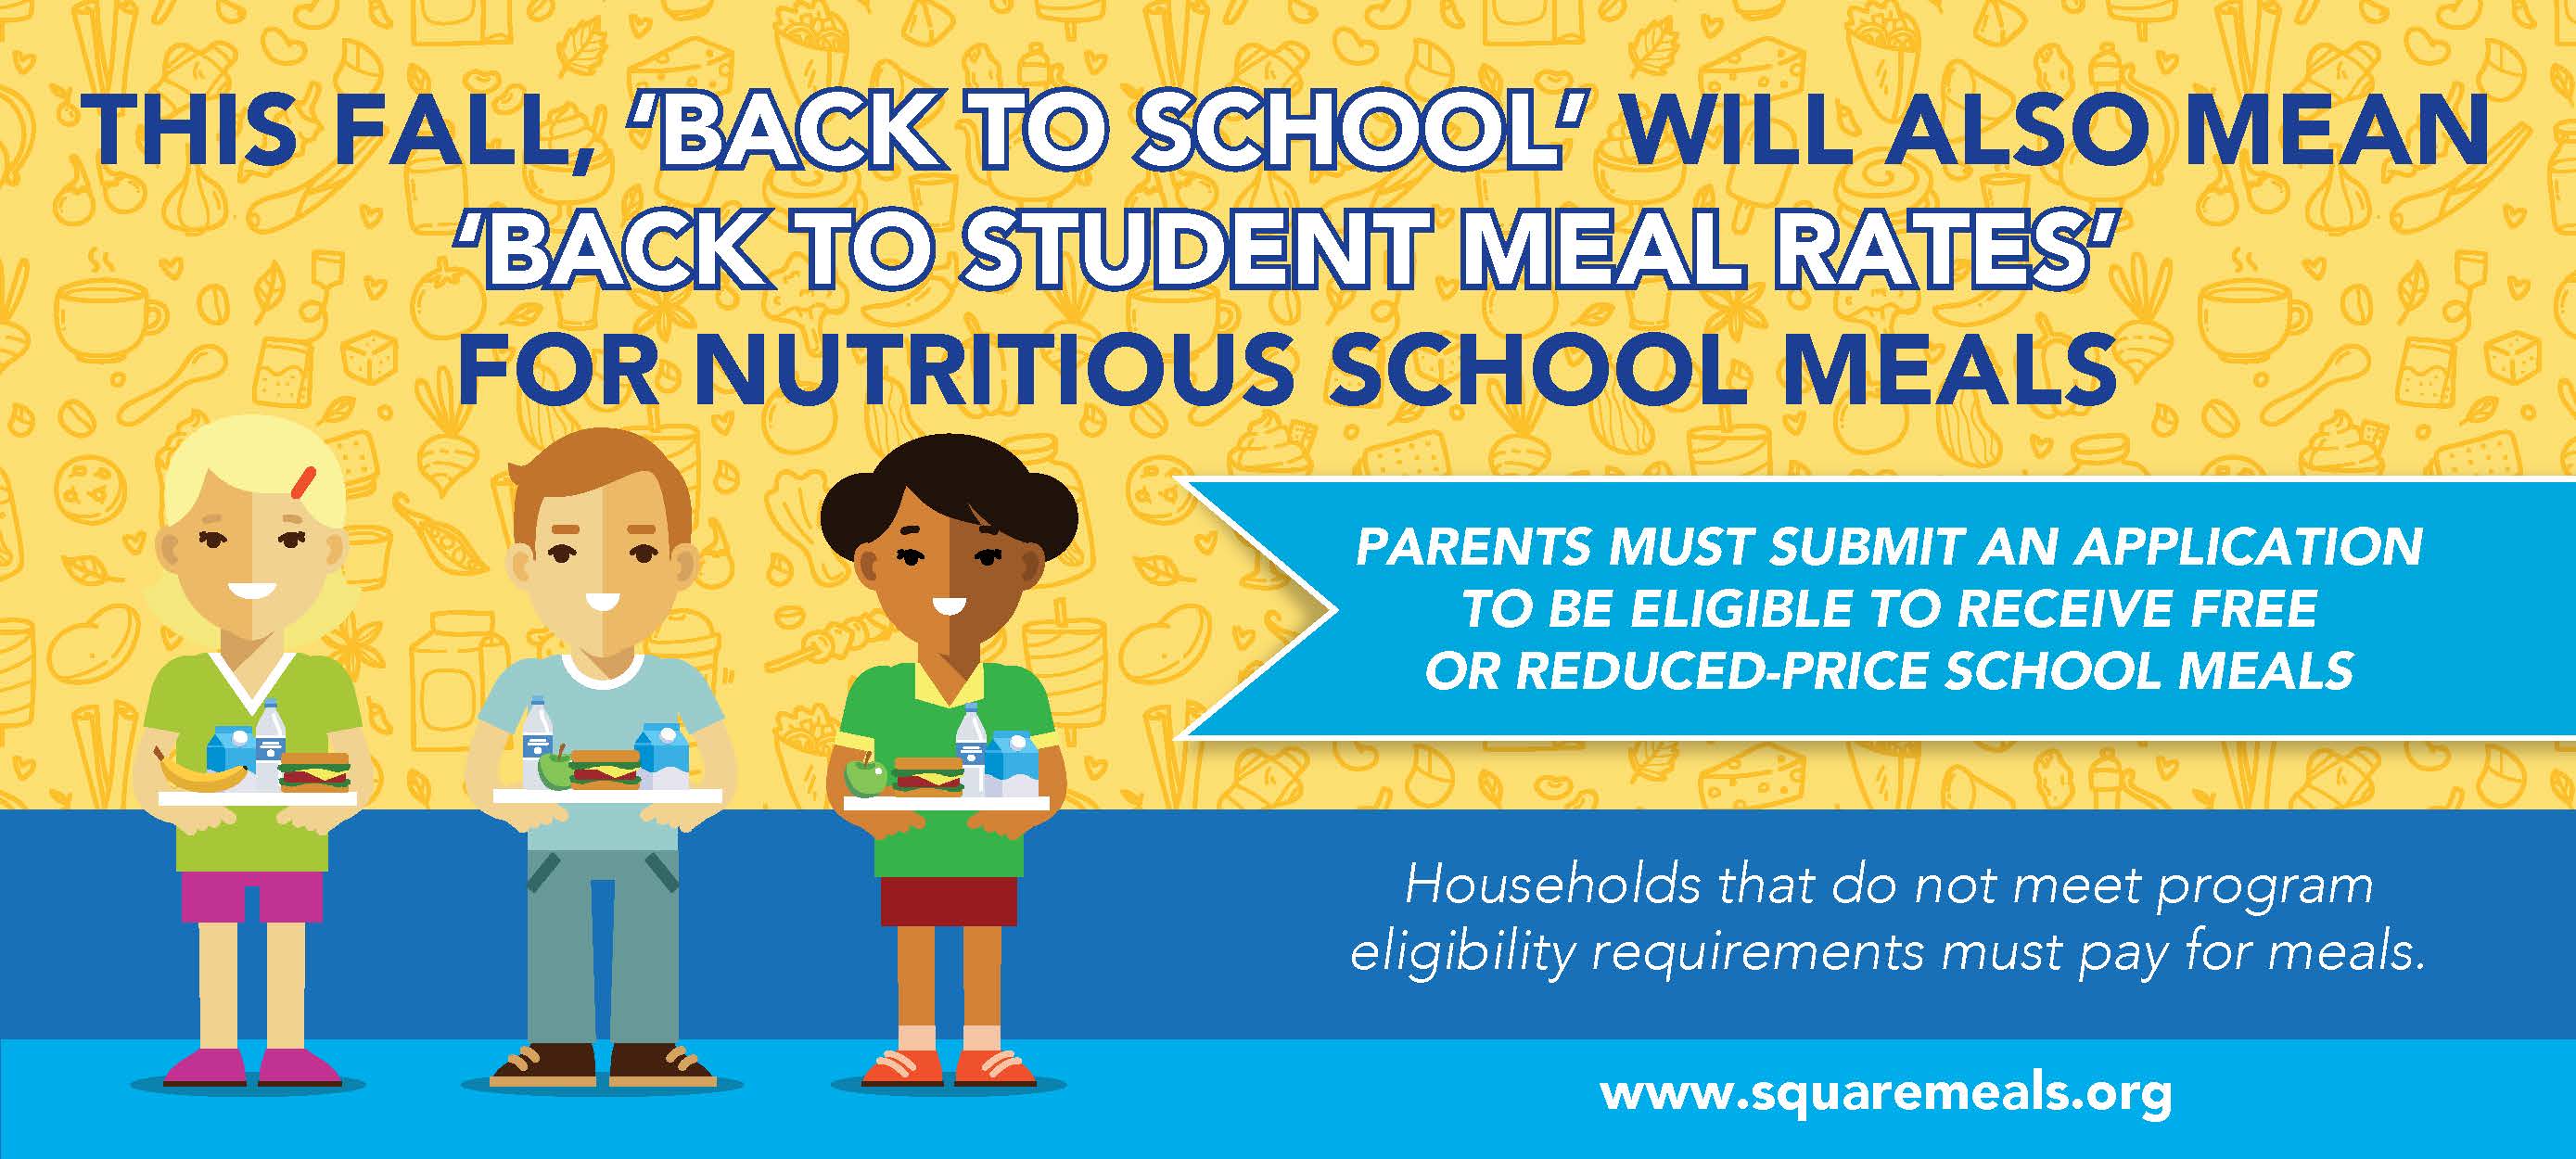 This fall, back to school also means back to regular pricing graphic from USDA> 